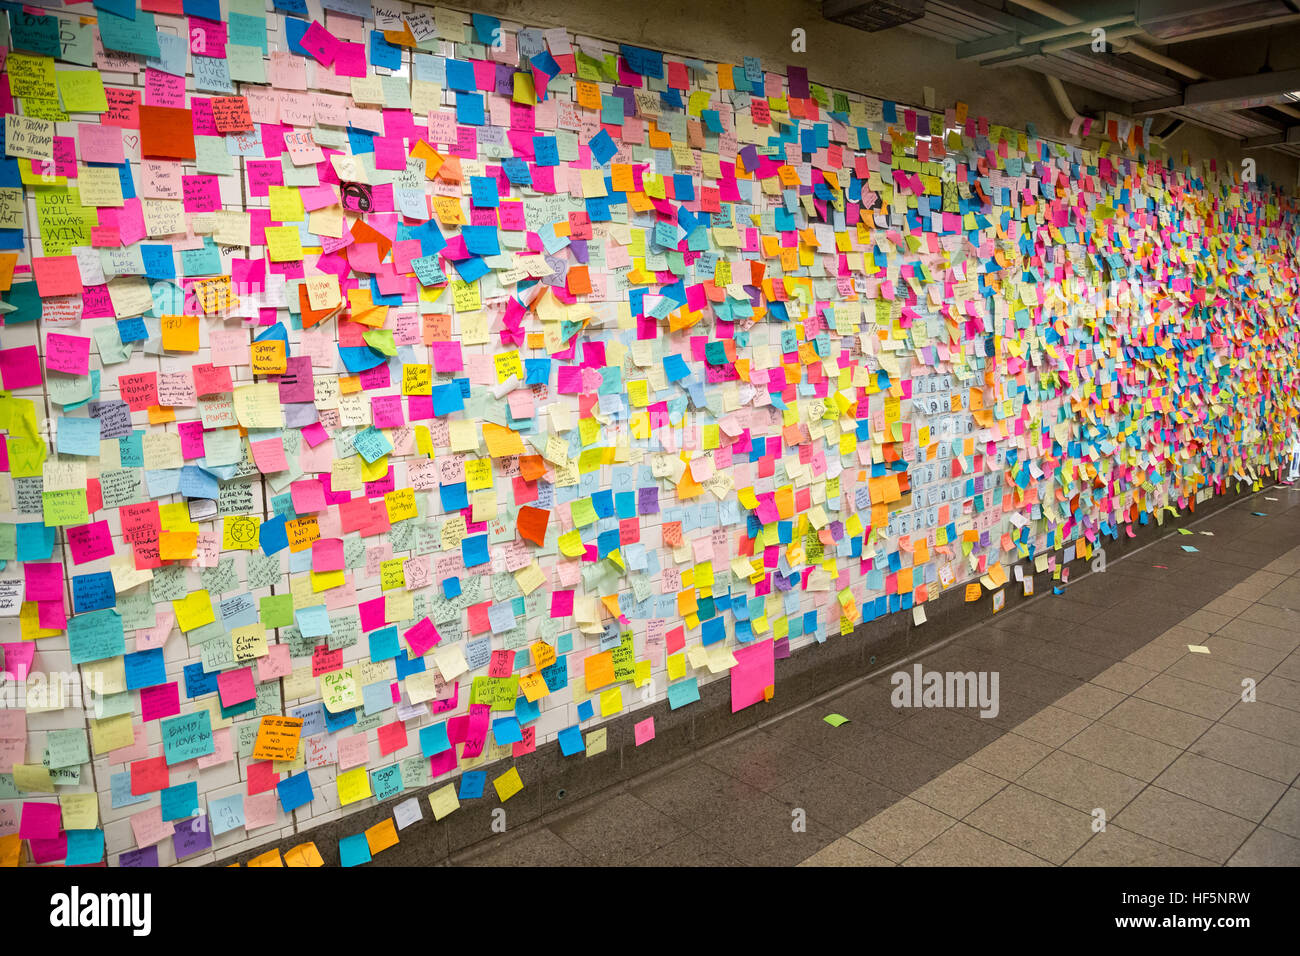 New York, United States of America - November 21, 2016: Sticky post-it notes on wall in Union Square subway station Stock Photo